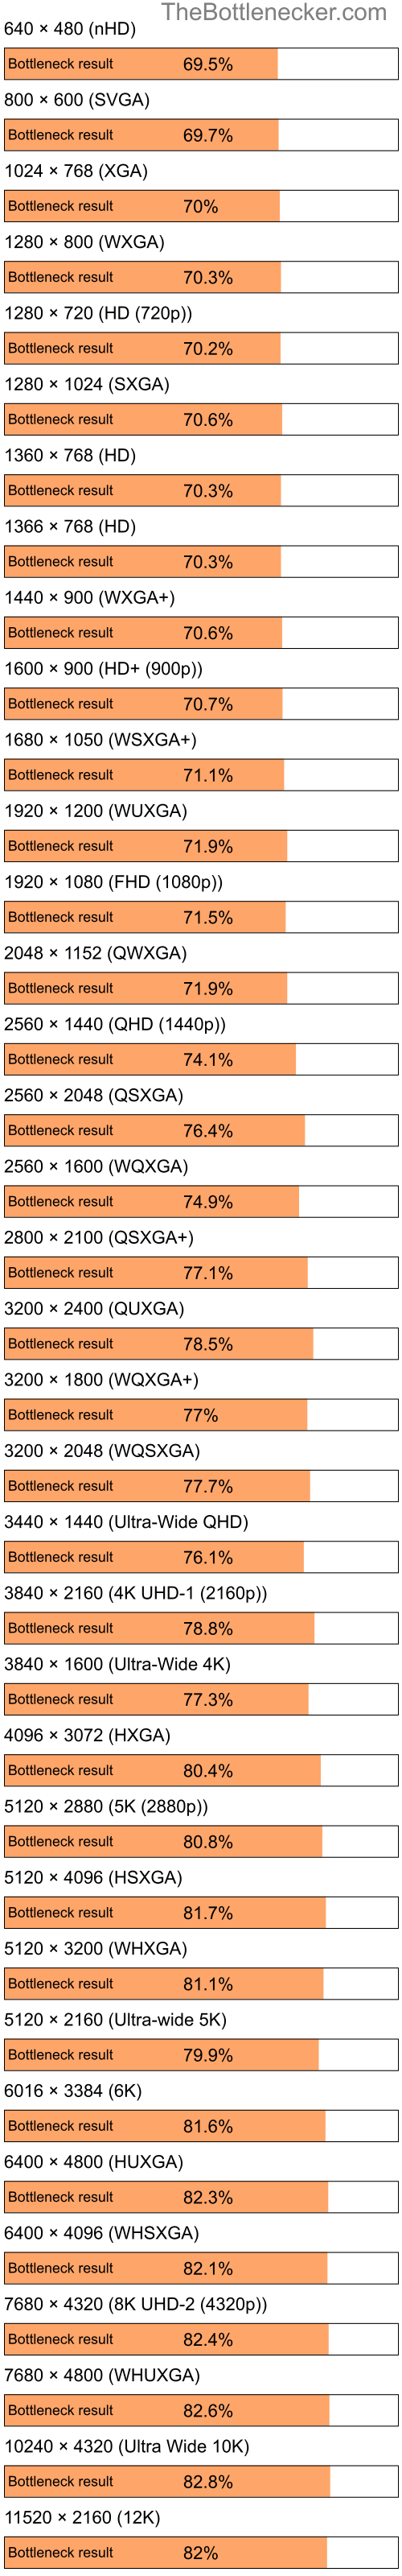 Bottleneck results by resolution for Intel Pentium 4 and NVIDIA GeForce 7300 LE in Graphic Card Intense Tasks